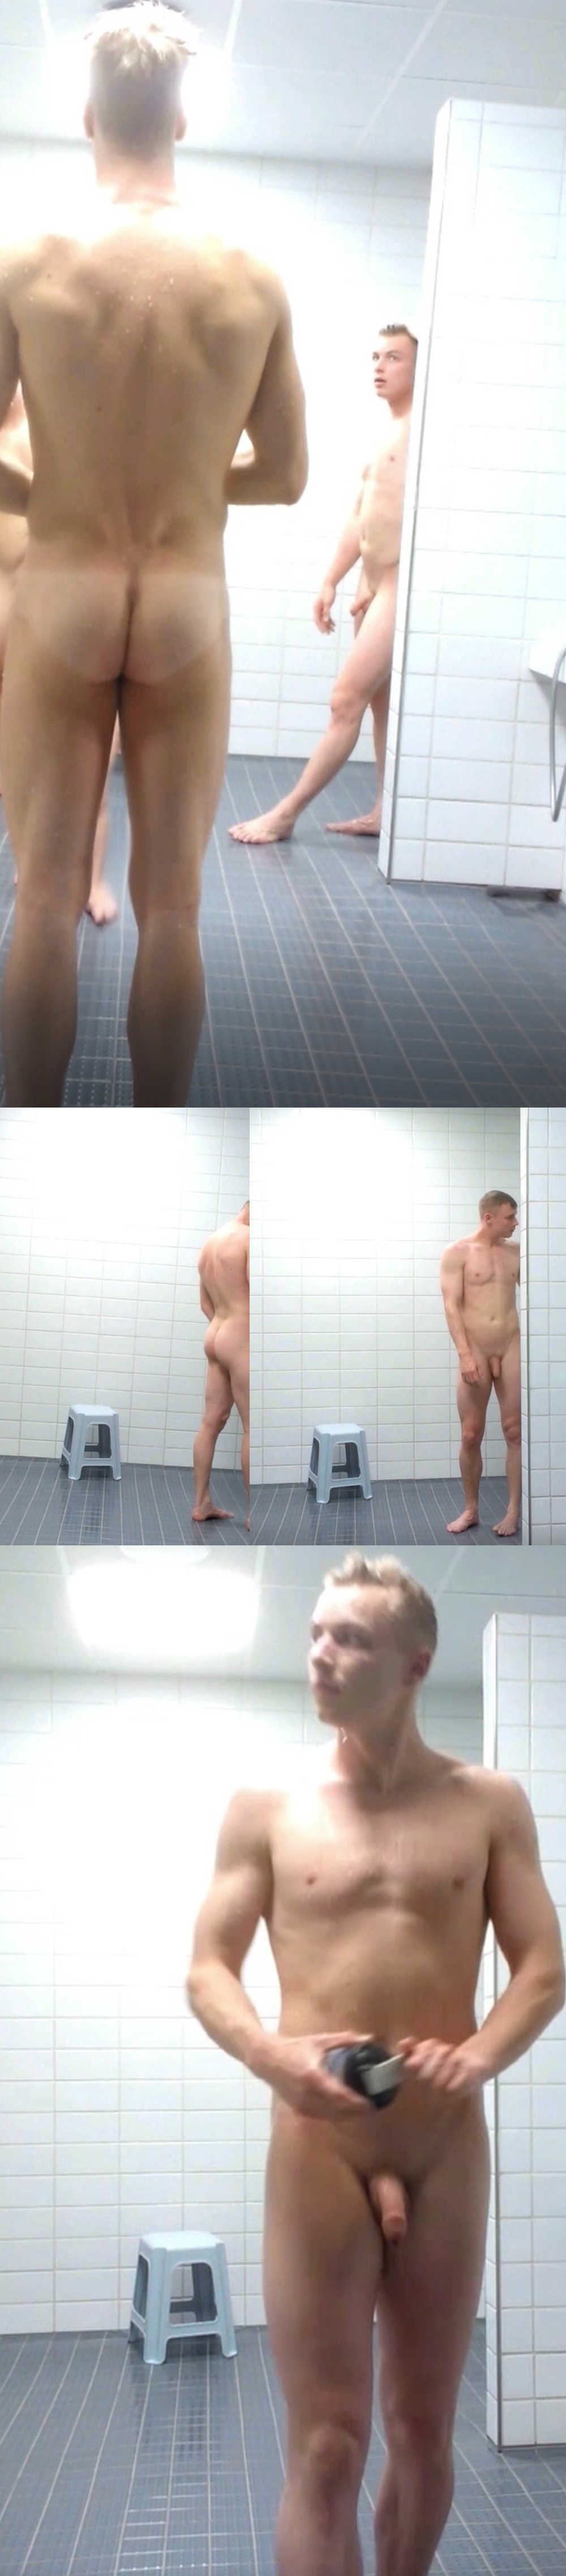 blond uncut guy caught naked by spycam in gym communal shower